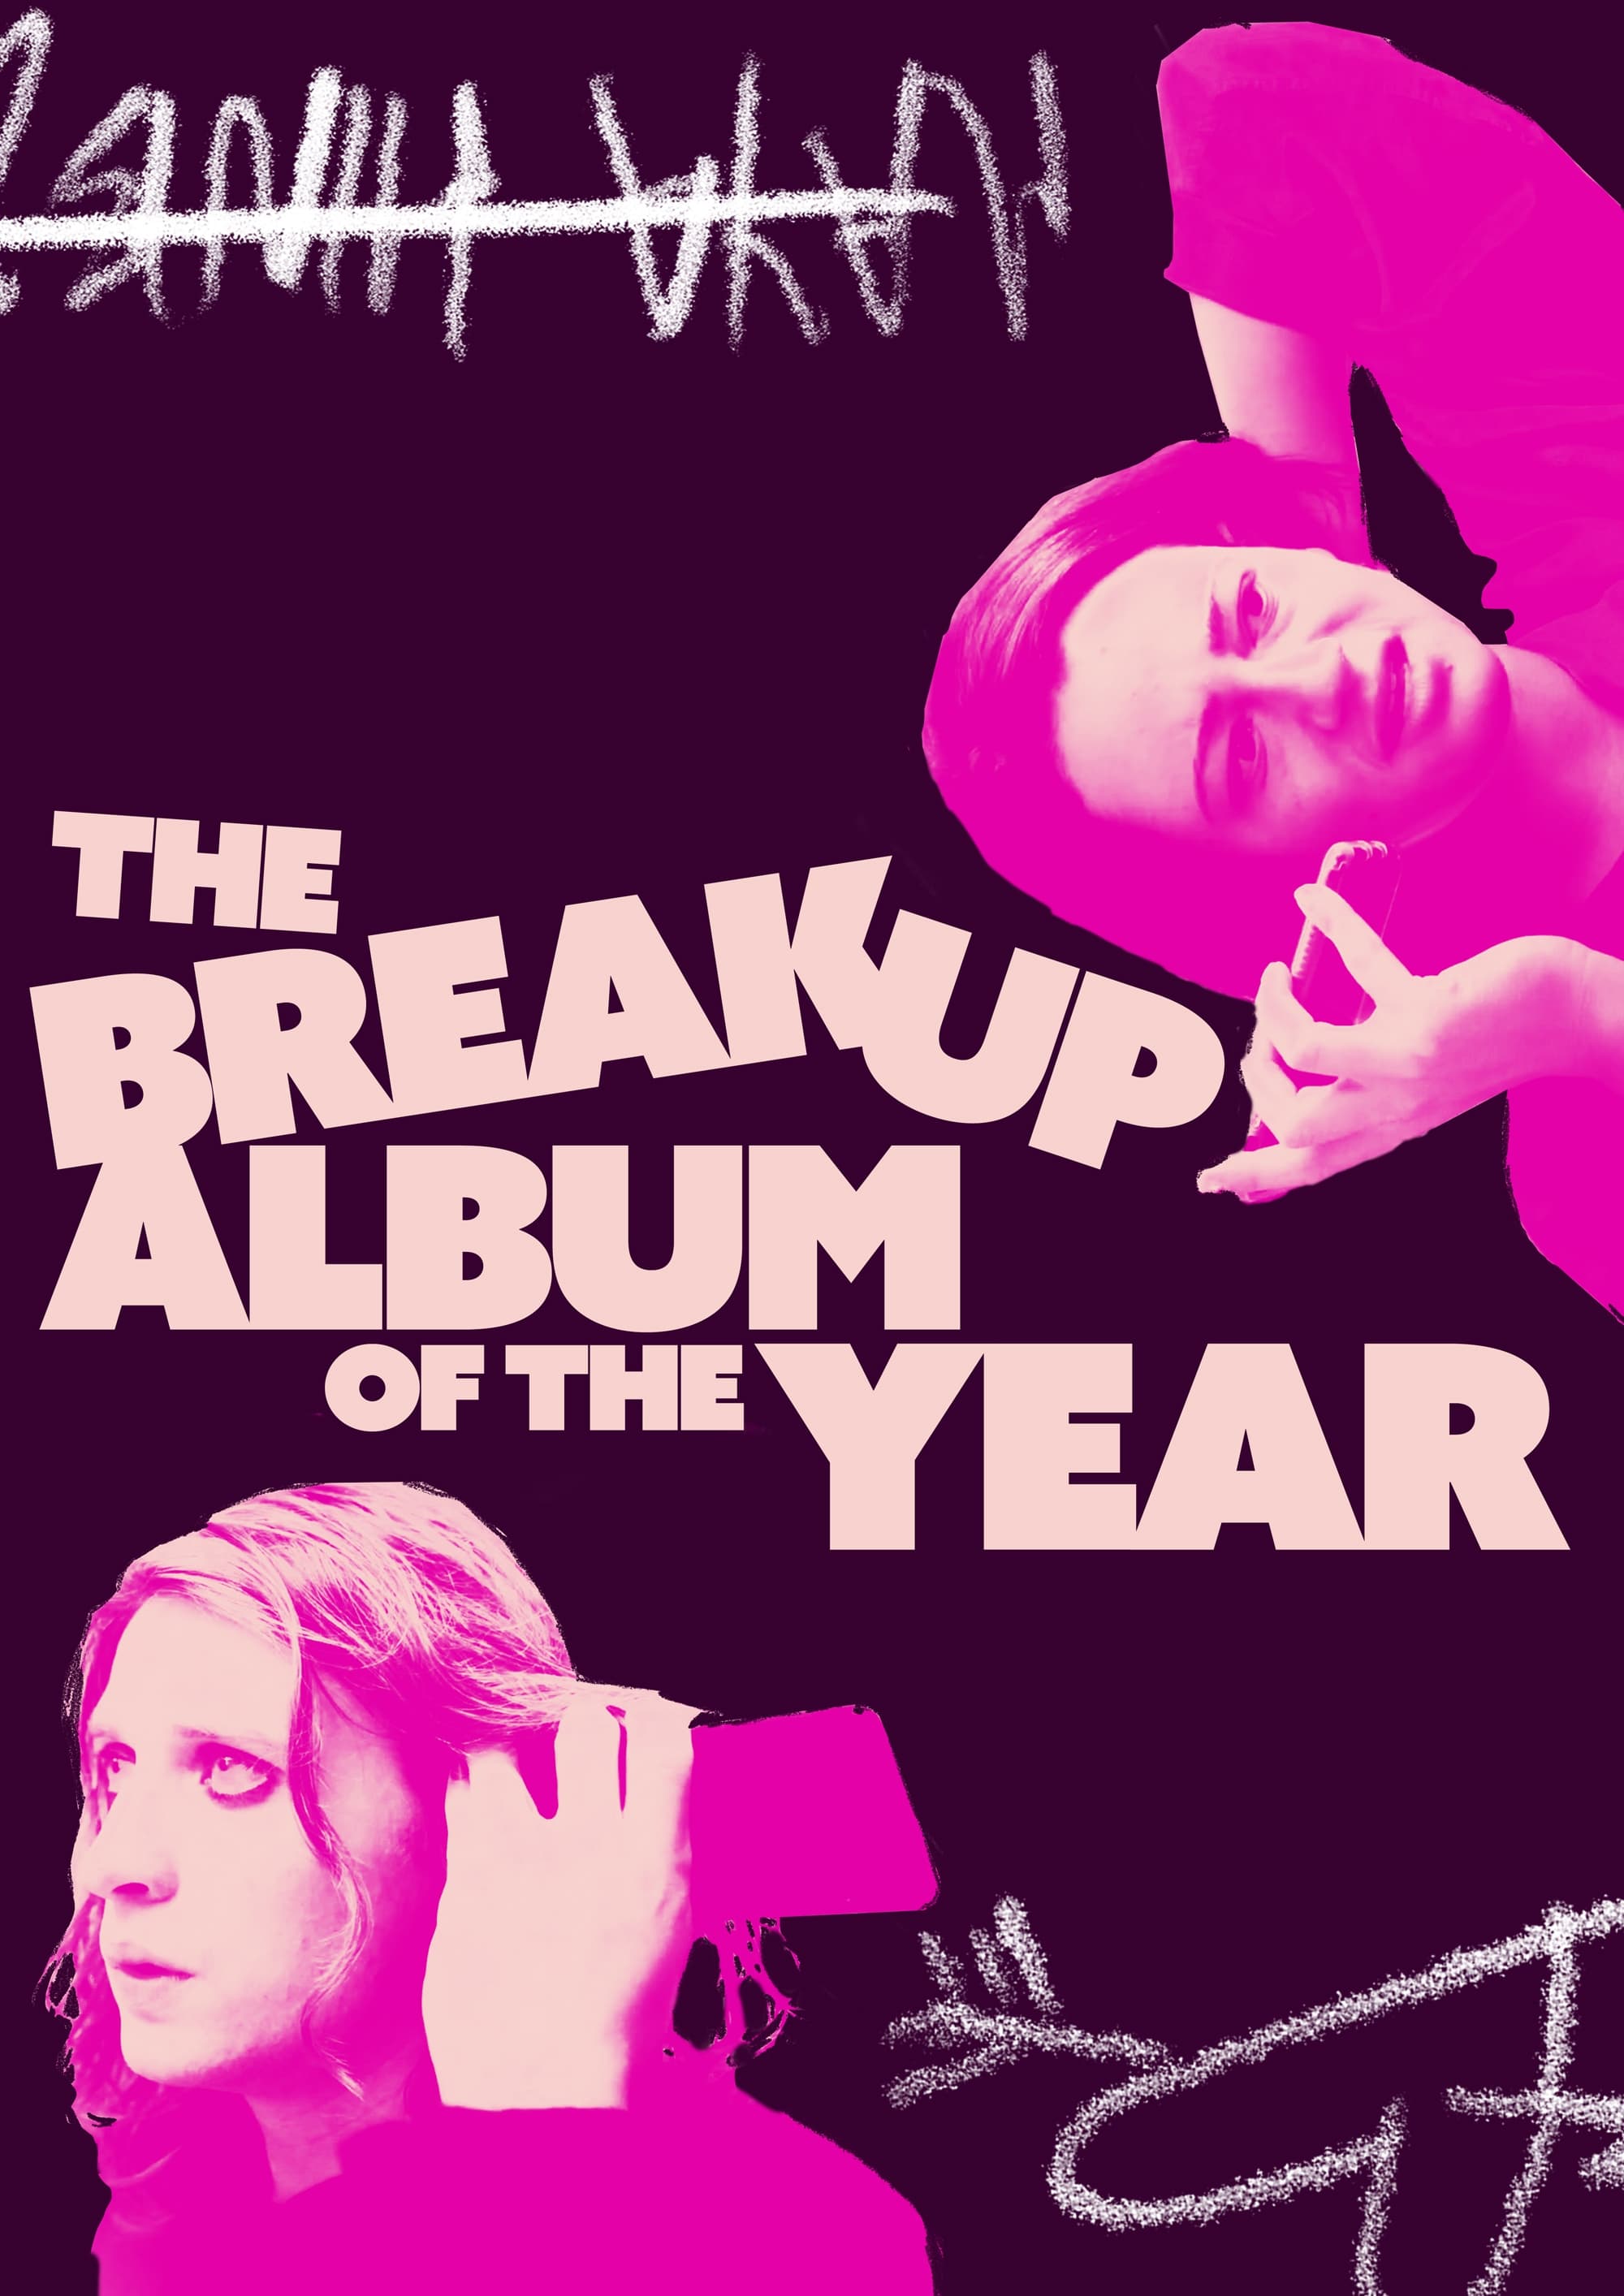 The Breakup Album of the Year